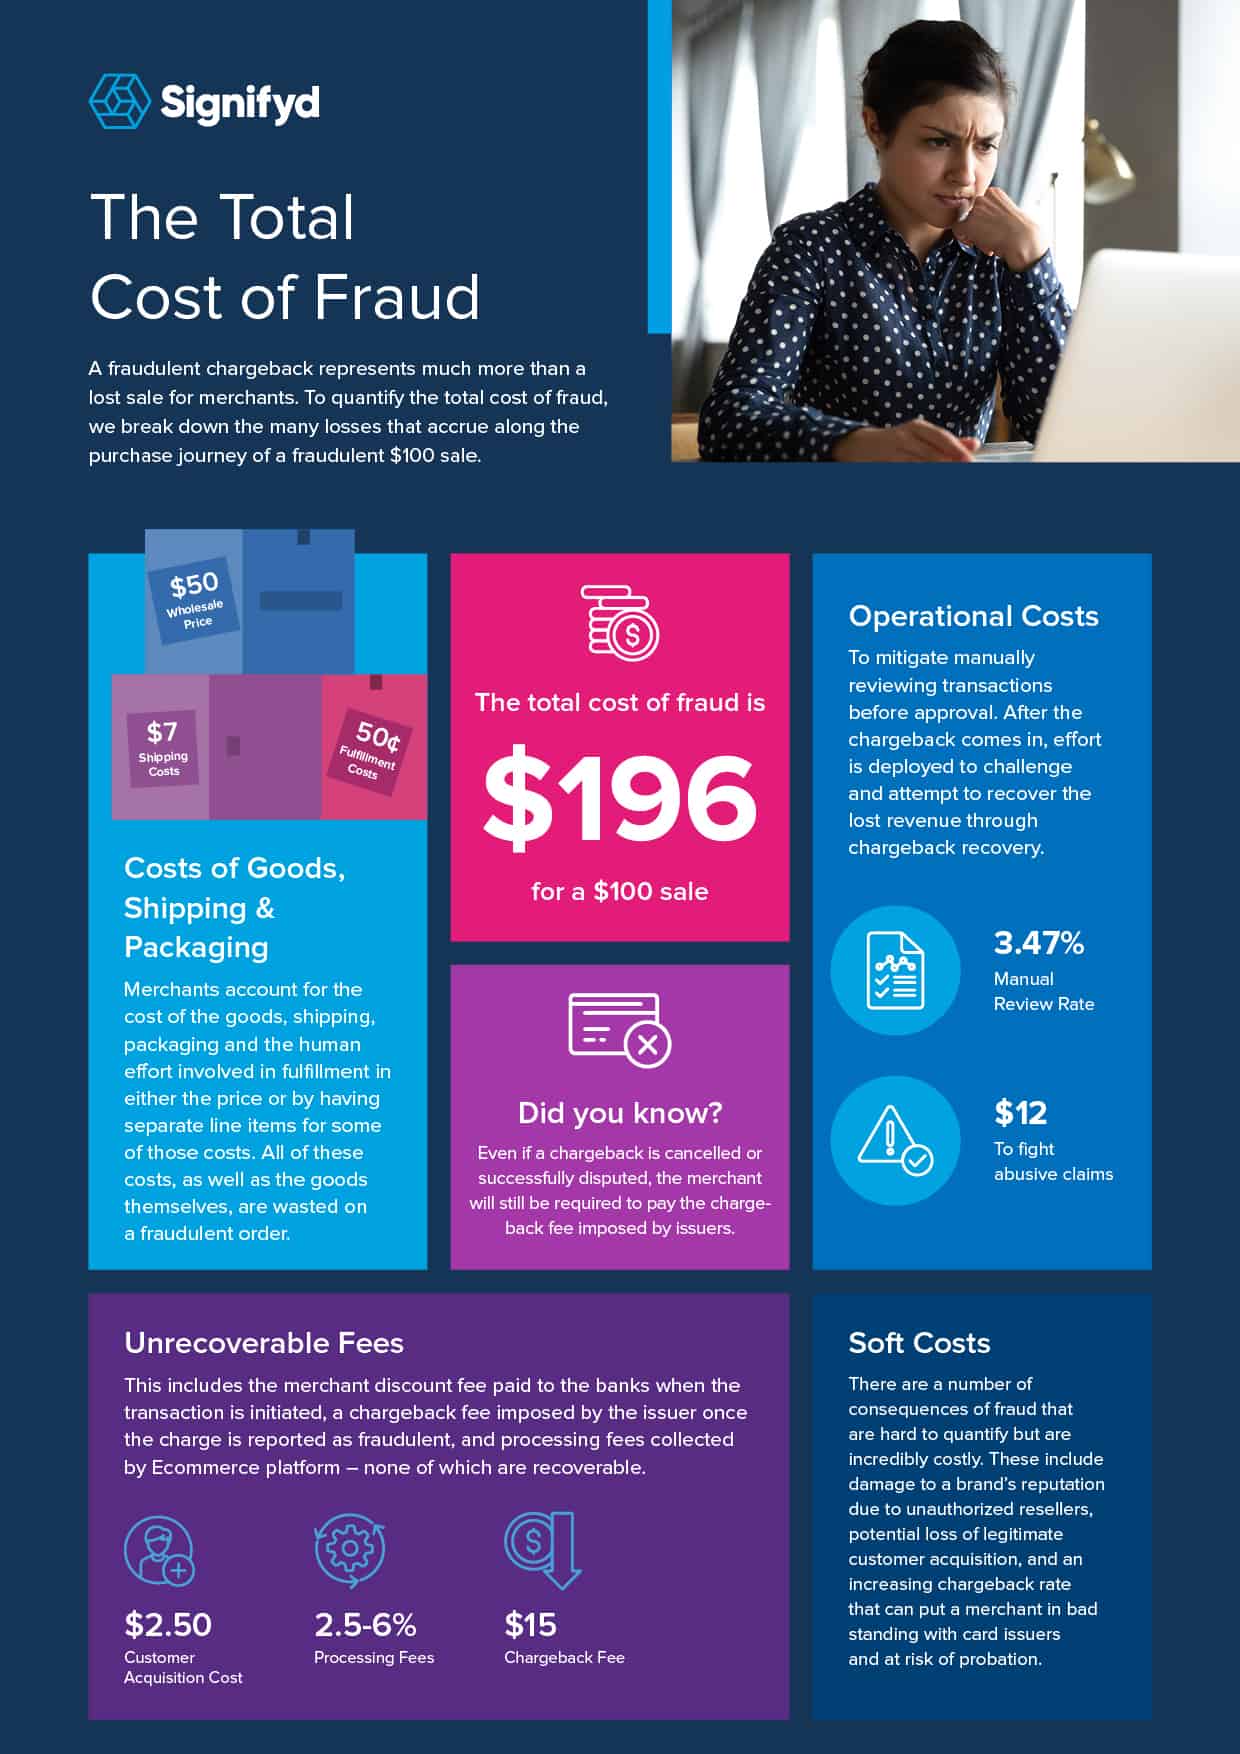 An infographic with photo of woman pondering a laptop screen running down Signifyd's total cost of fraud calculation: $196 on a $100 purchase